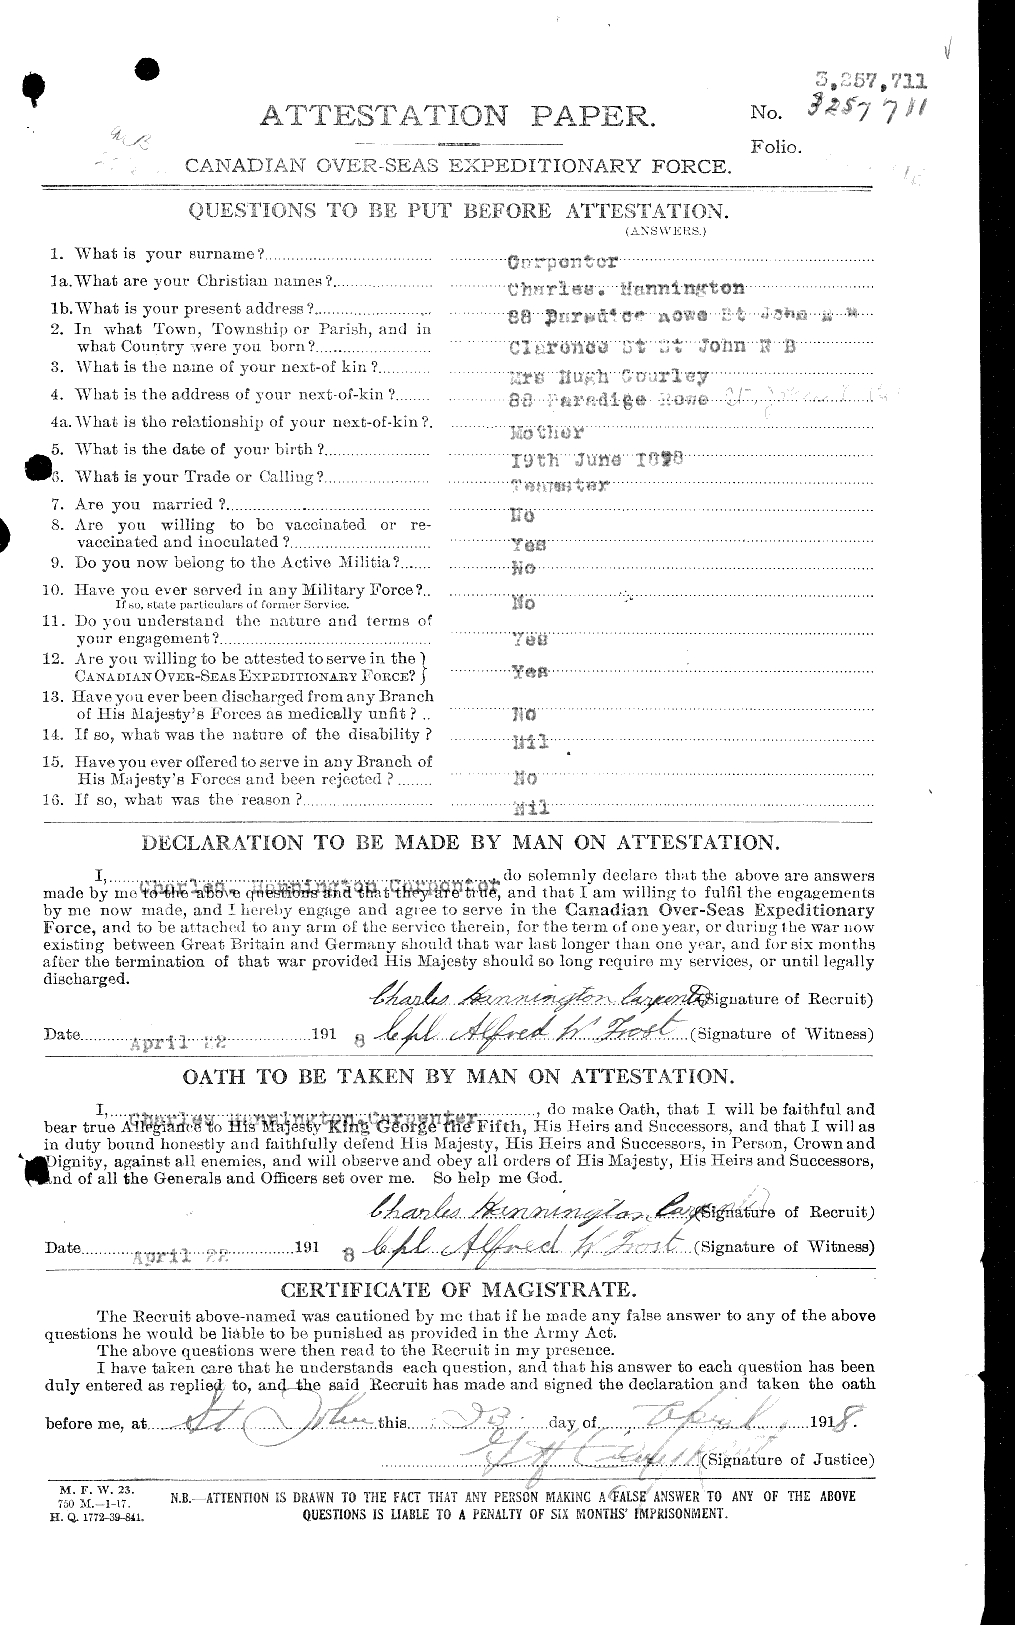 Personnel Records of the First World War - CEF 010131a